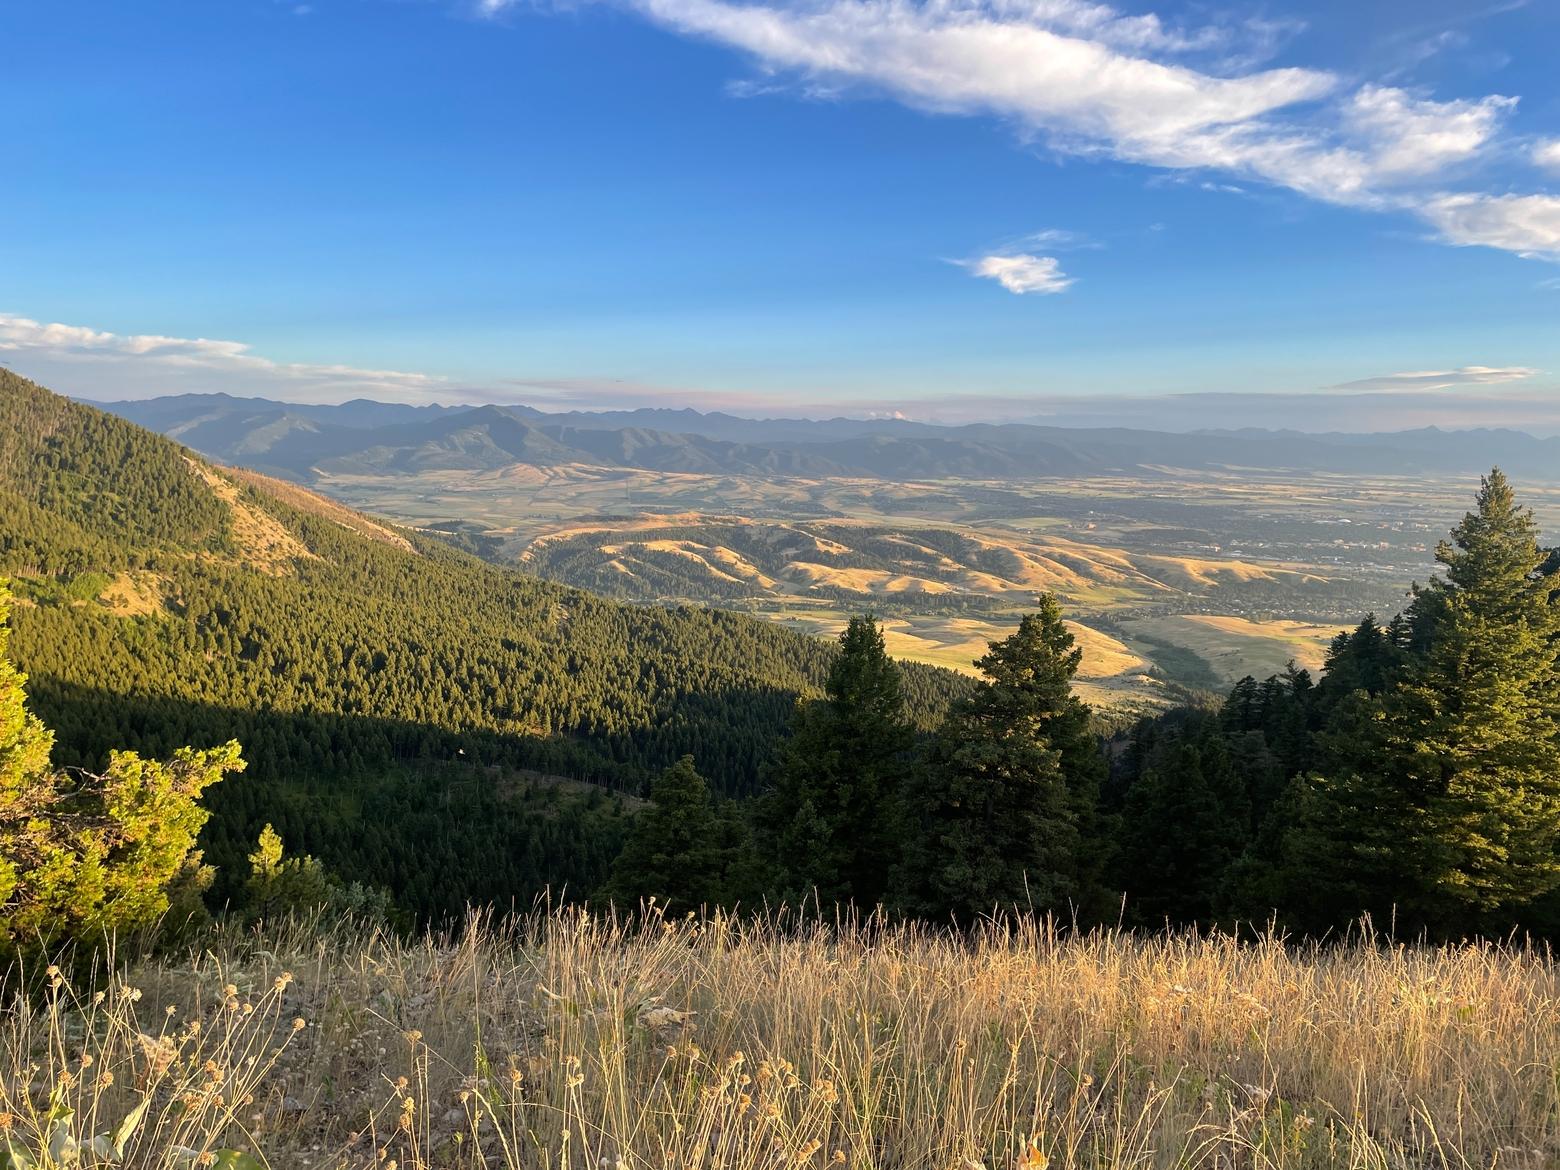 Looking southwest from the foothills of Bridger Range, it's easy to see how much open land still exists in the Gallatin Valley. According to the Gallatin County Land Use Profile, more than 83 percent of the privately-owned land is still critical wildlife habitat.